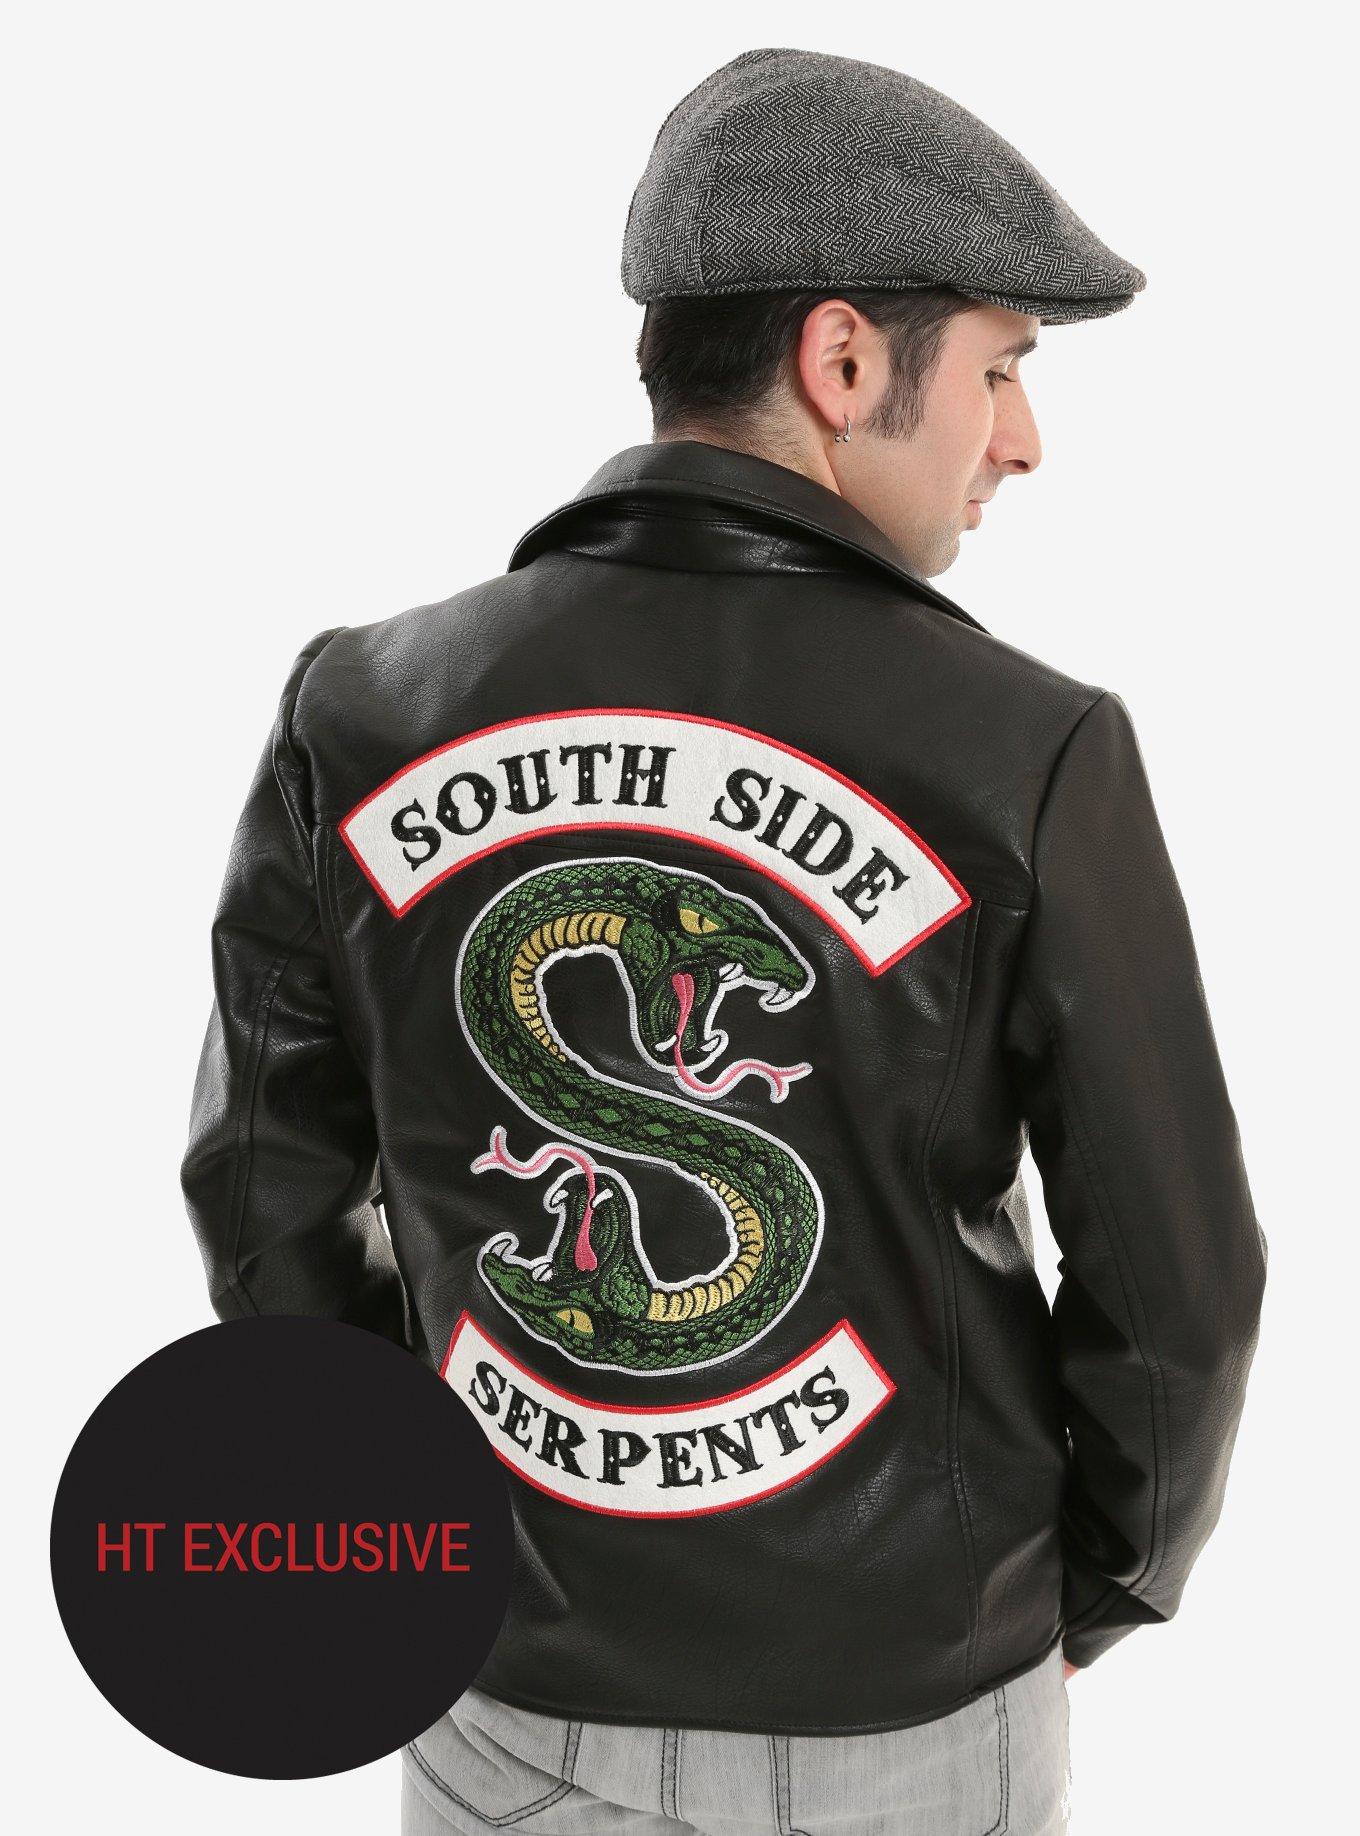 Riverdale Southside Serpents Faux Leather Jacket Hot Exclusive | Hot Topic